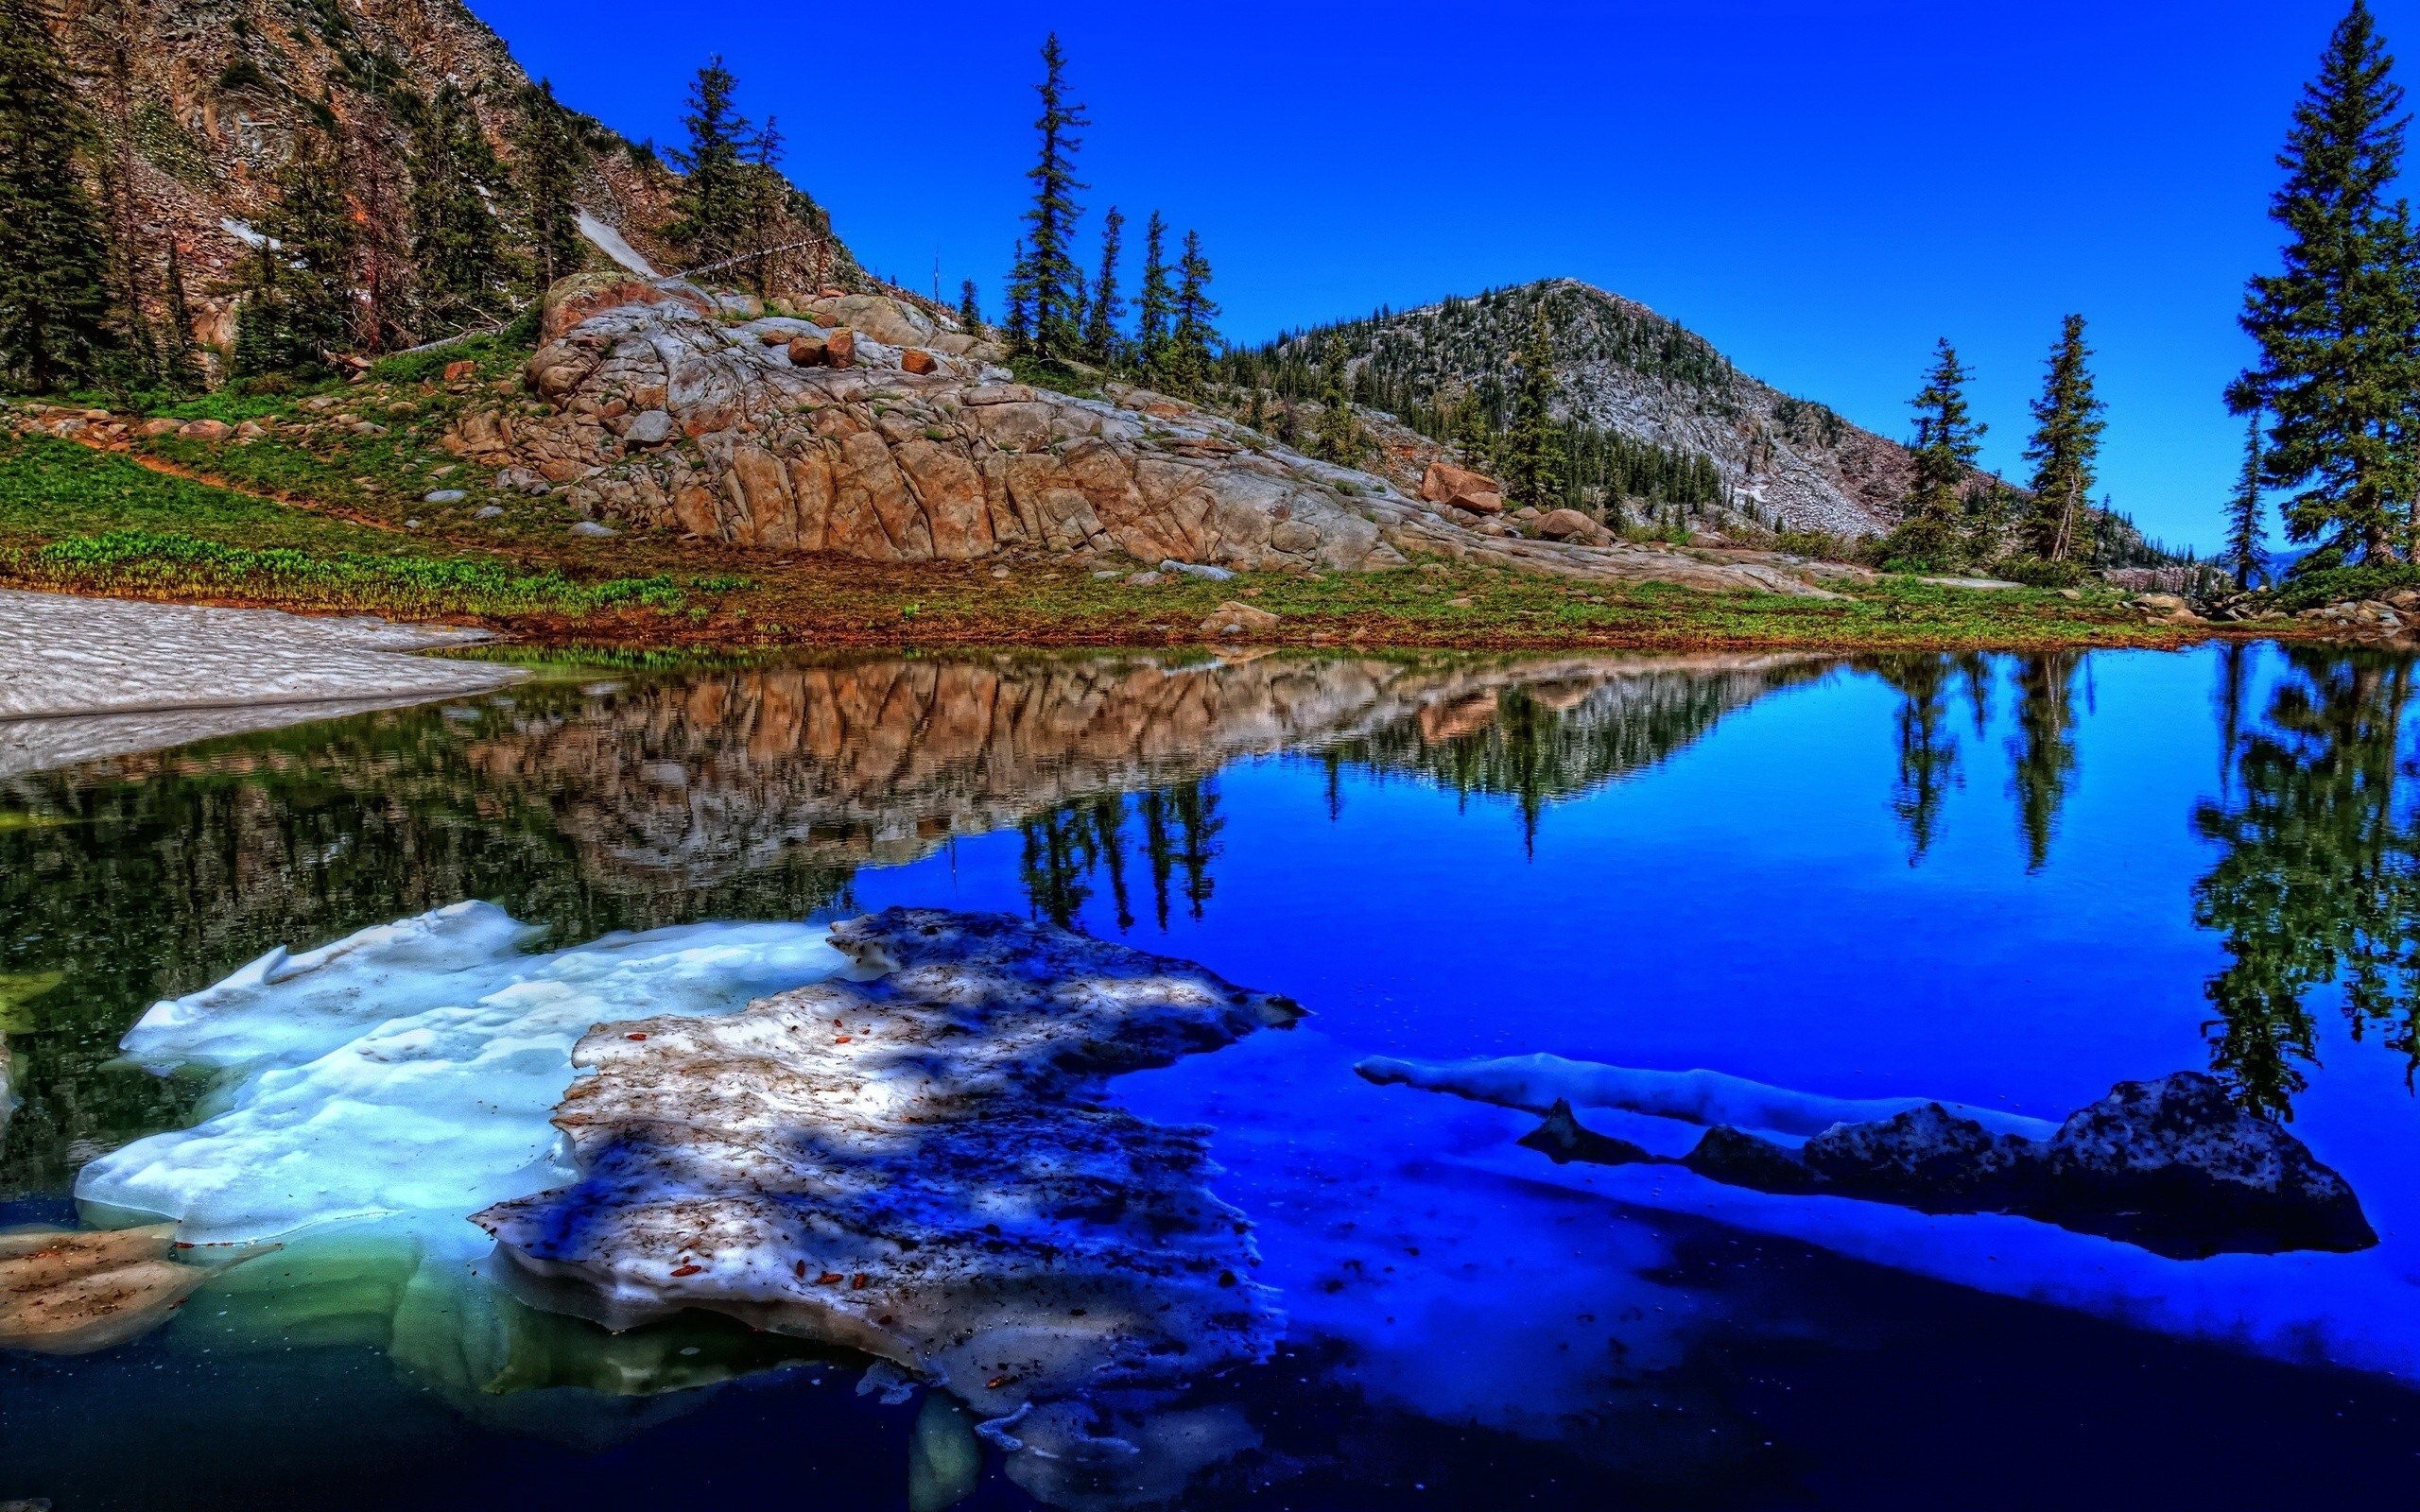 Reflection in the water natural scenery wallpaper #20 - 2560x1600